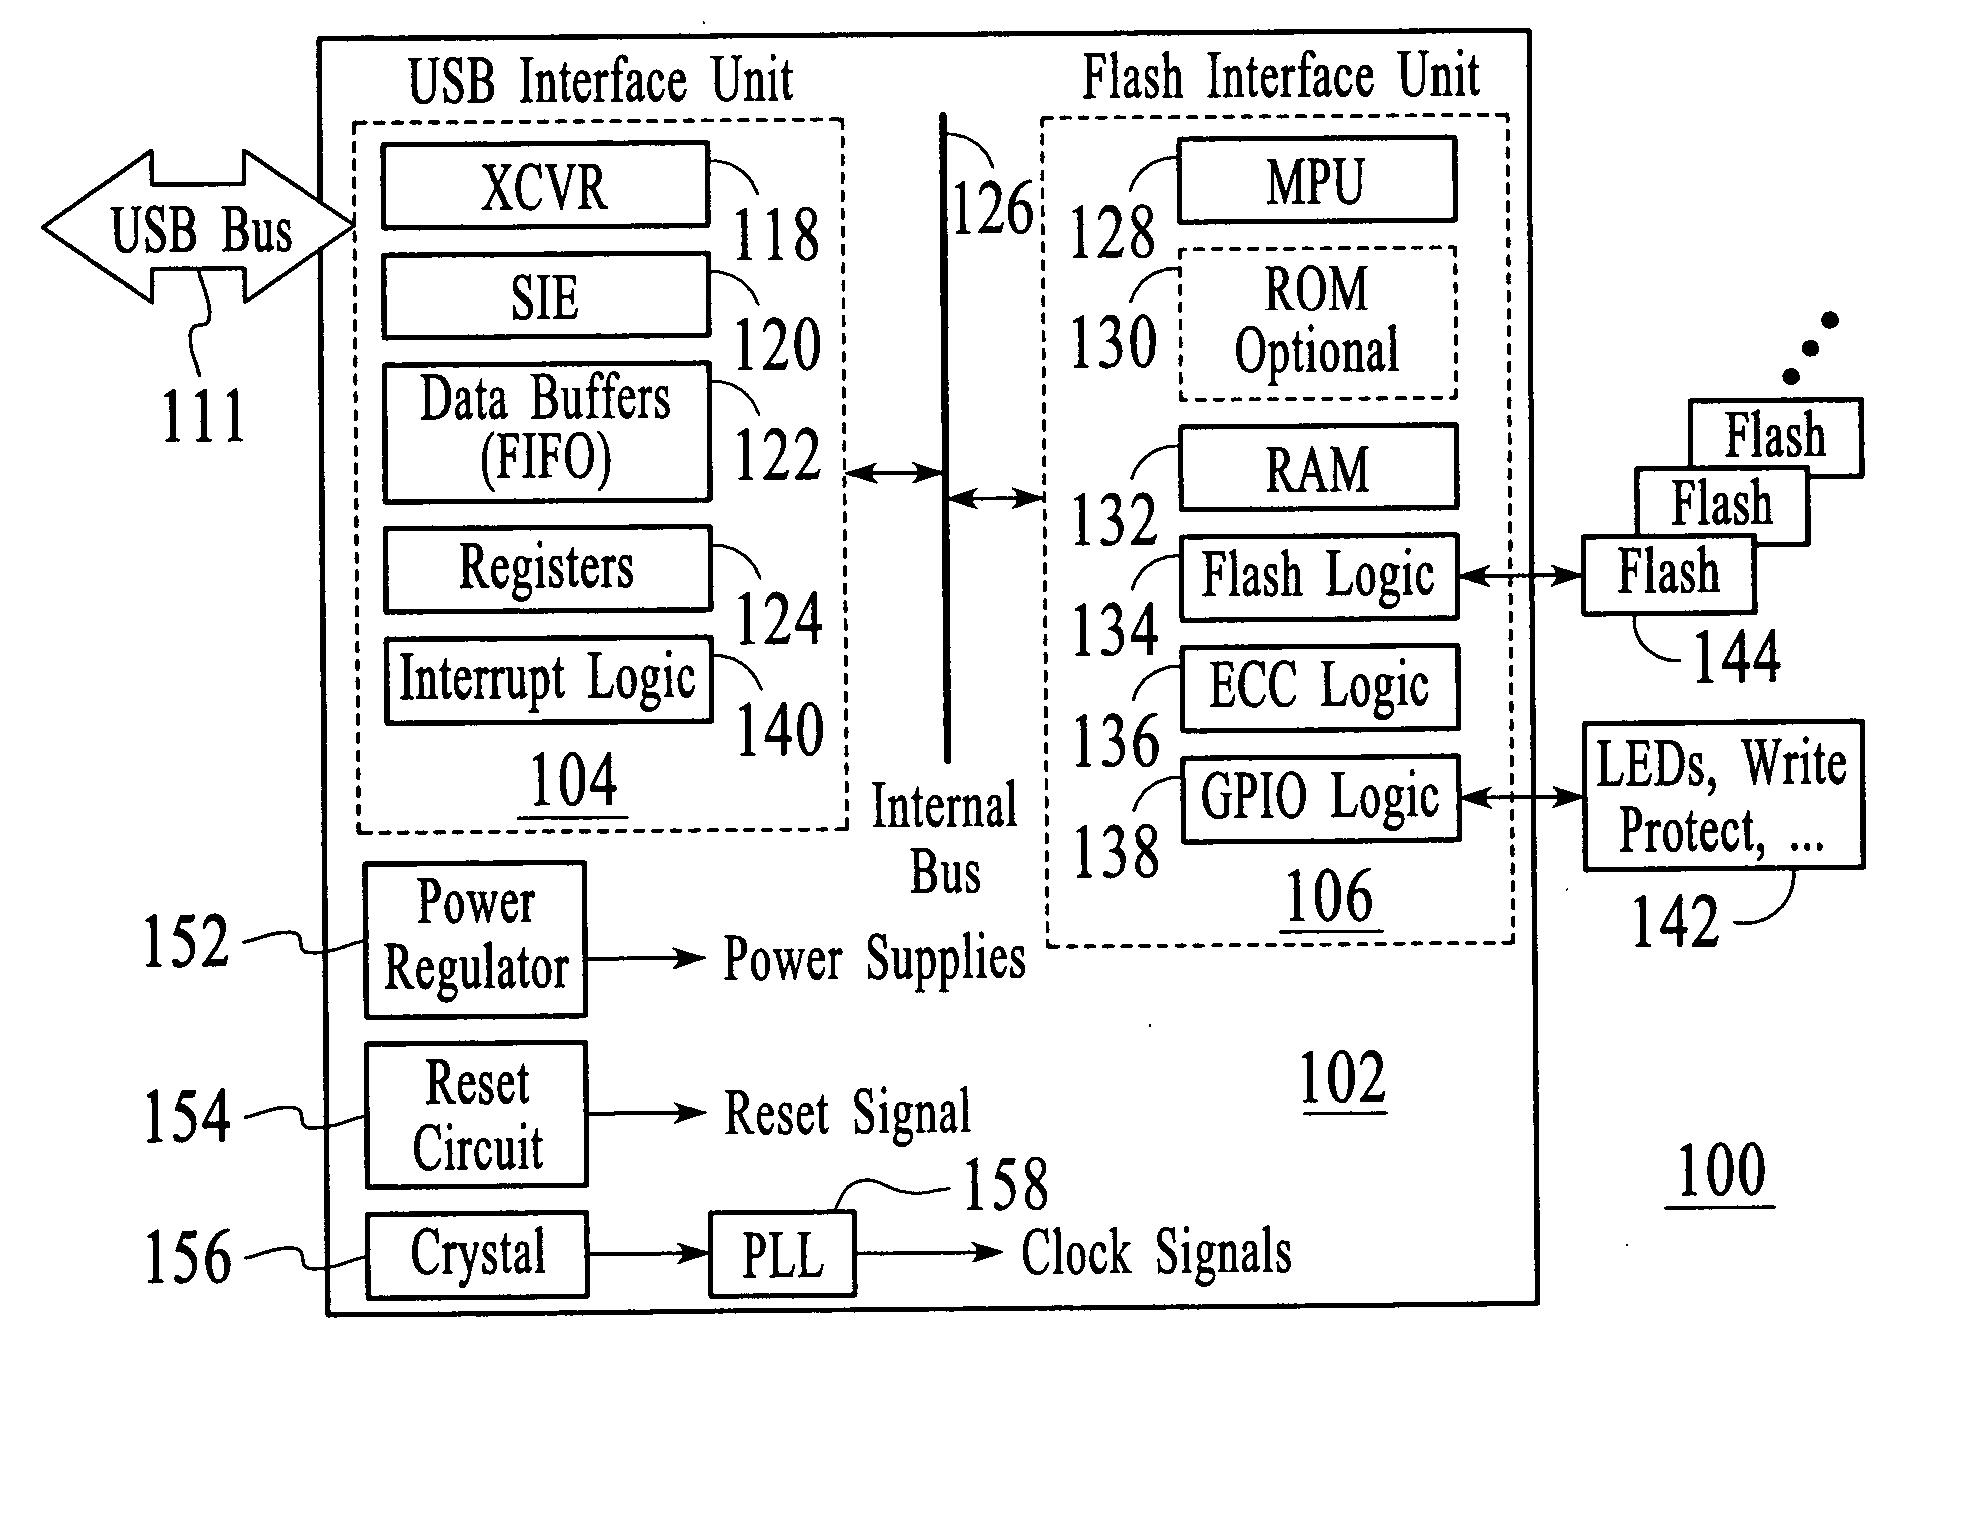 Highly integrated mass storage device with an intelligent flash controller